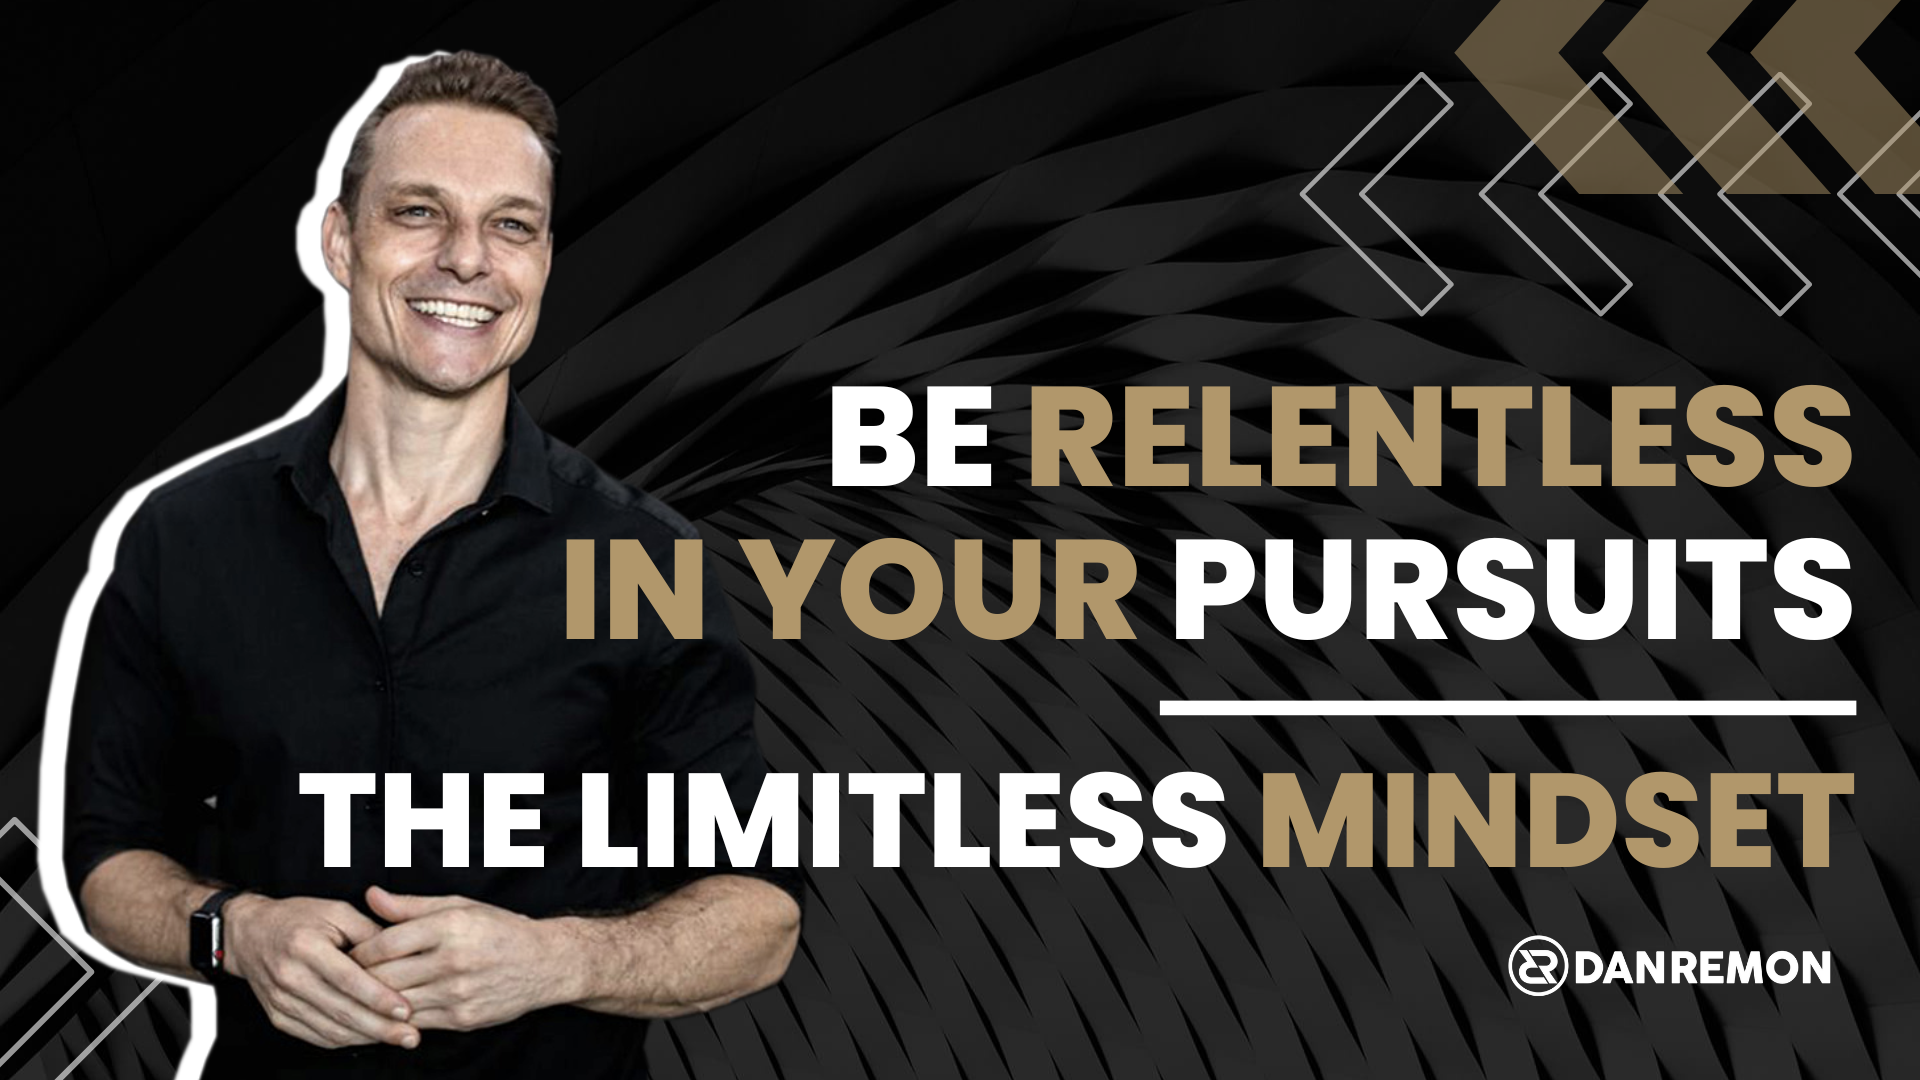 The Limitless Mindset: Be Relentless In Your Pursuits